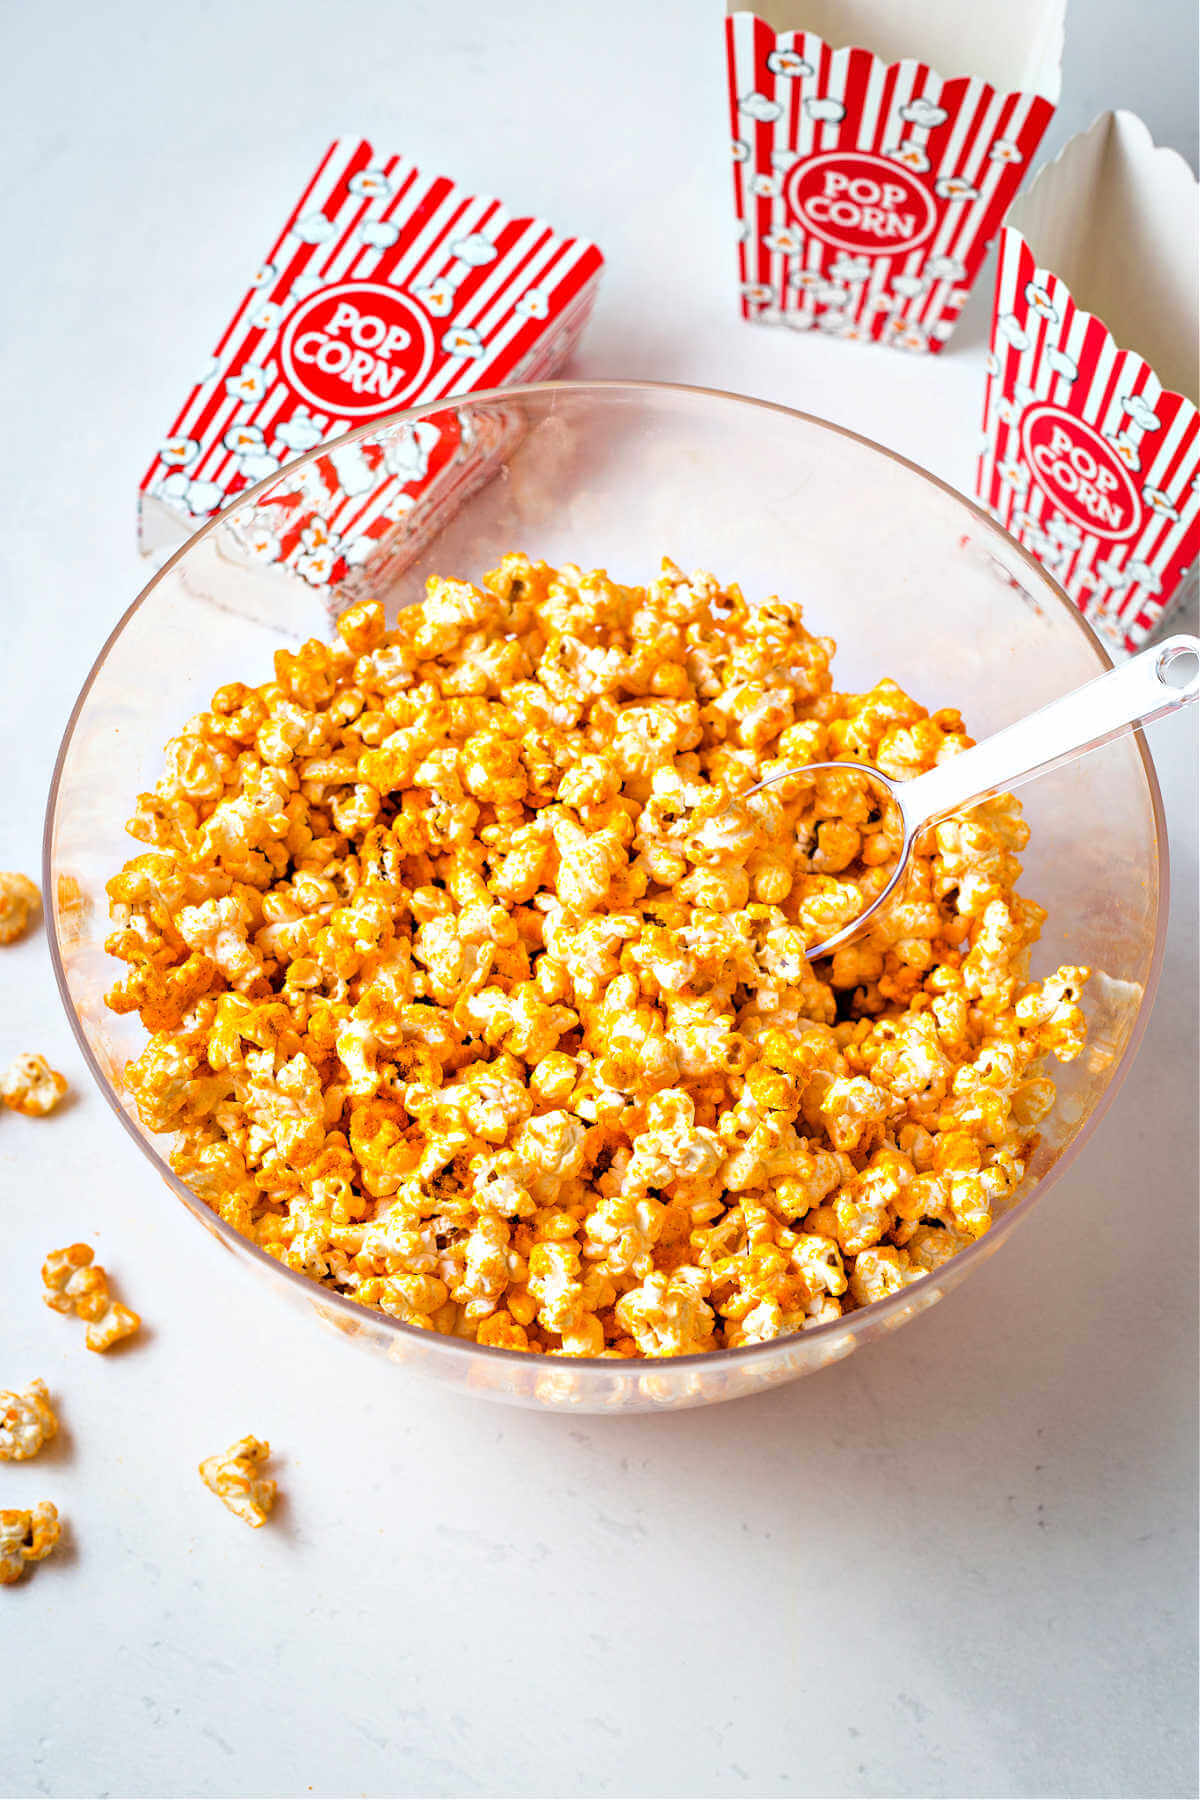 cheddar cheese popcorn in a clear bowl with a scoop and red and white popcorn boxes in the background.